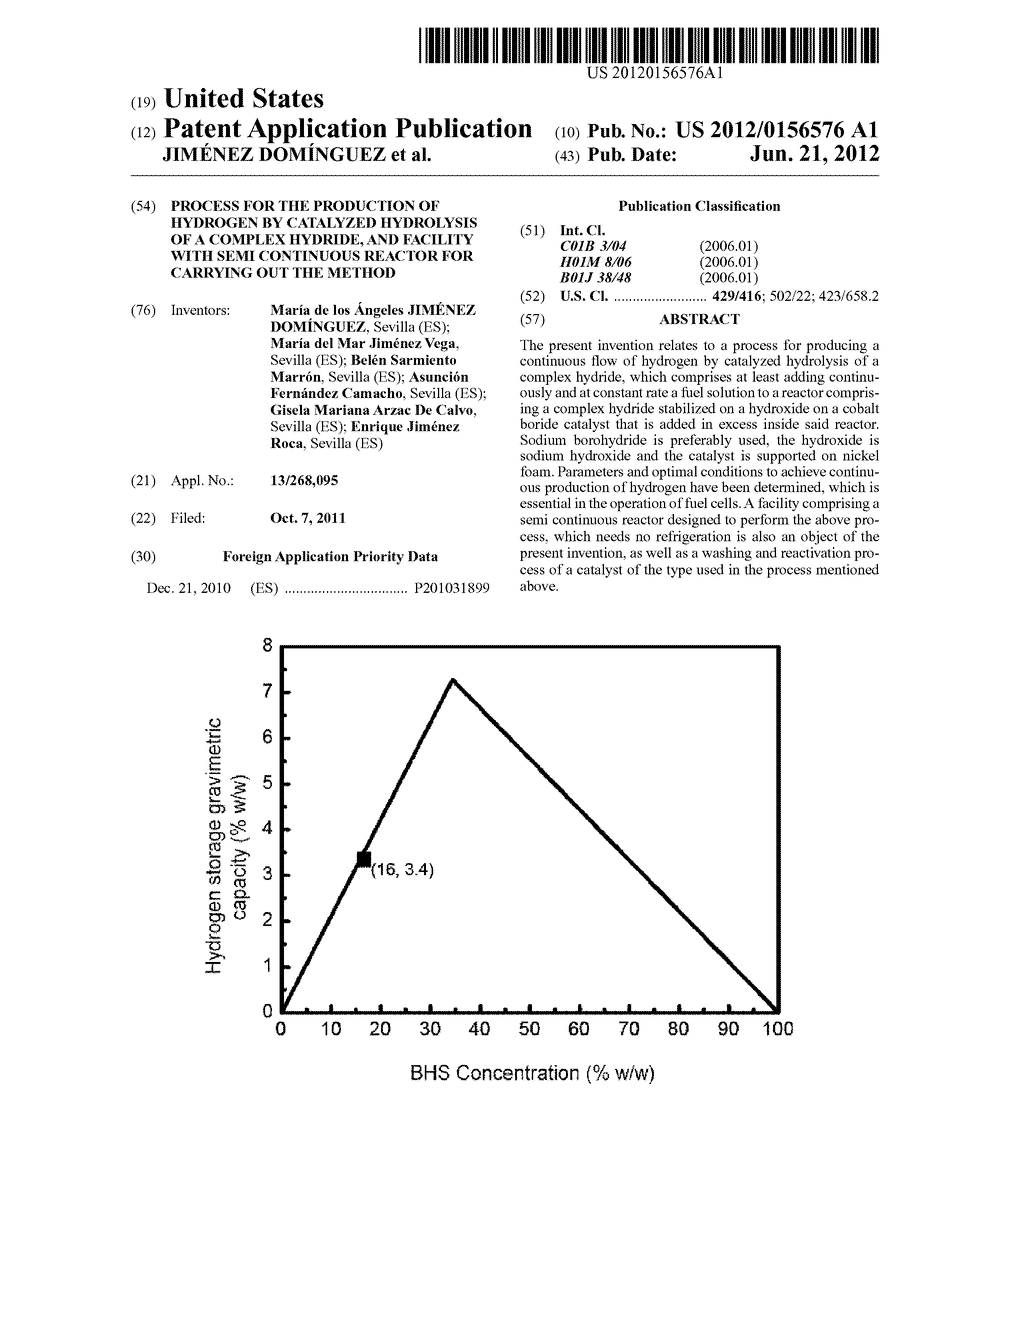 PROCESS FOR THE PRODUCTION OF HYDROGEN BY CATALYZED HYDROLYSIS OF A     COMPLEX HYDRIDE, AND FACILITY WITH SEMI CONTINUOUS REACTOR FOR CARRYING     OUT THE METHOD - diagram, schematic, and image 01